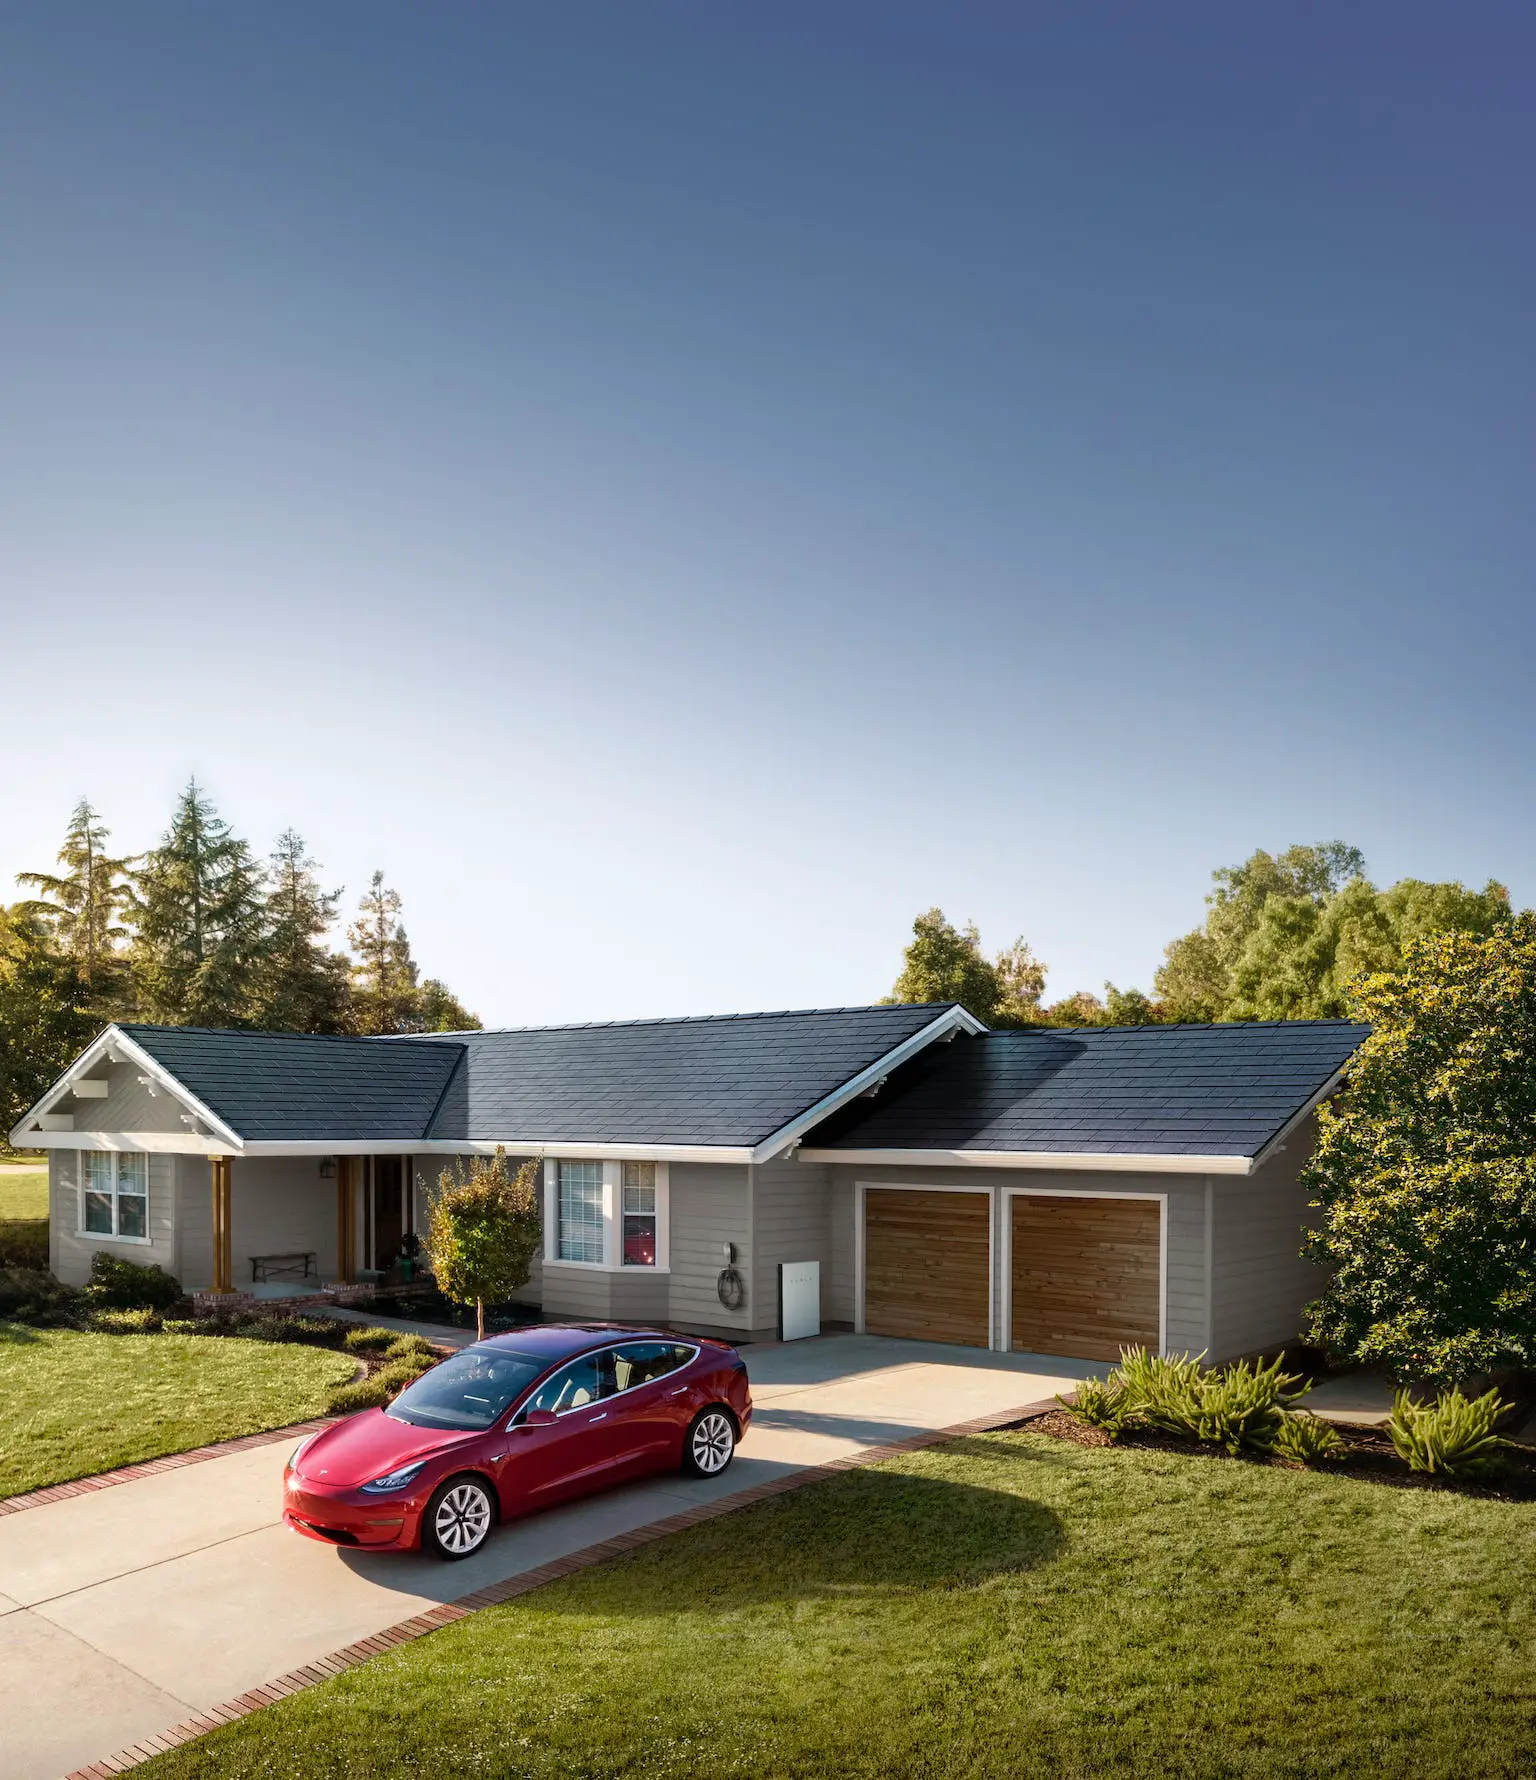 Tesla Solar Roof cost and availability: How to buy Elon Musk